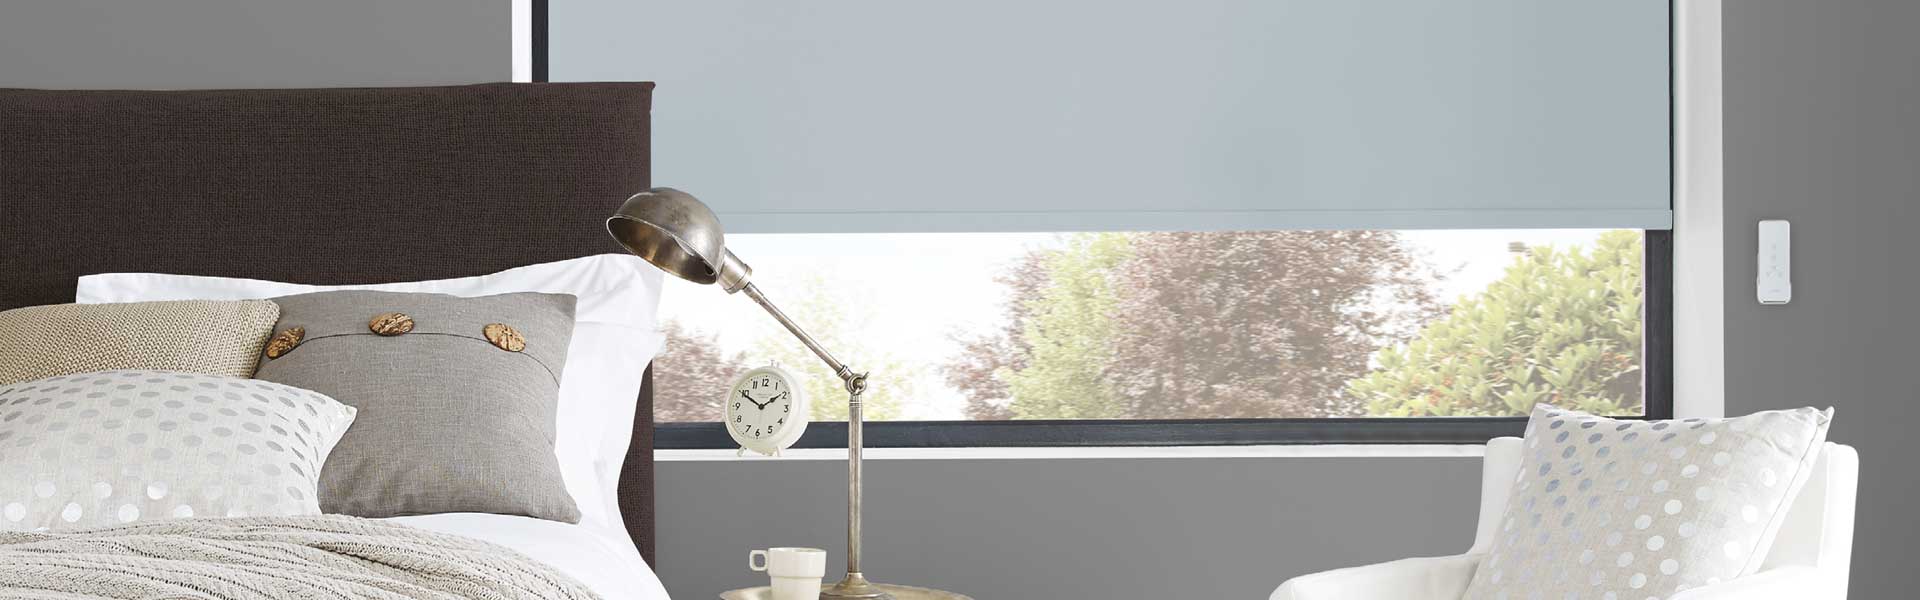 roller blinds from shutterstyle